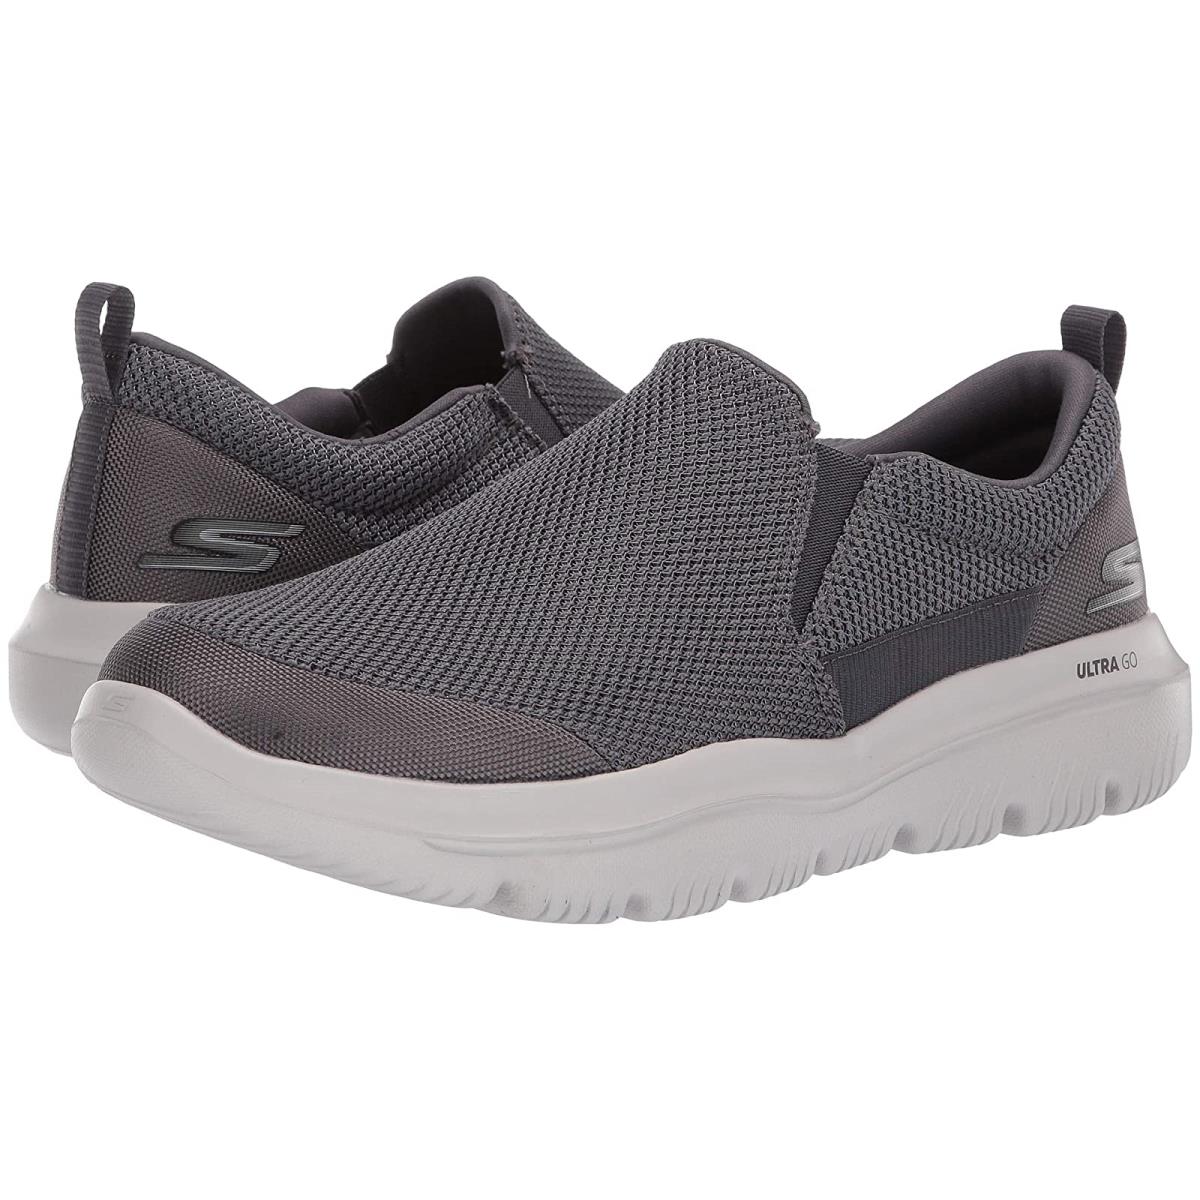 Man`s Shoes Skechers Performance Go Walk Evolution Ultra - Impeccable Charcoal